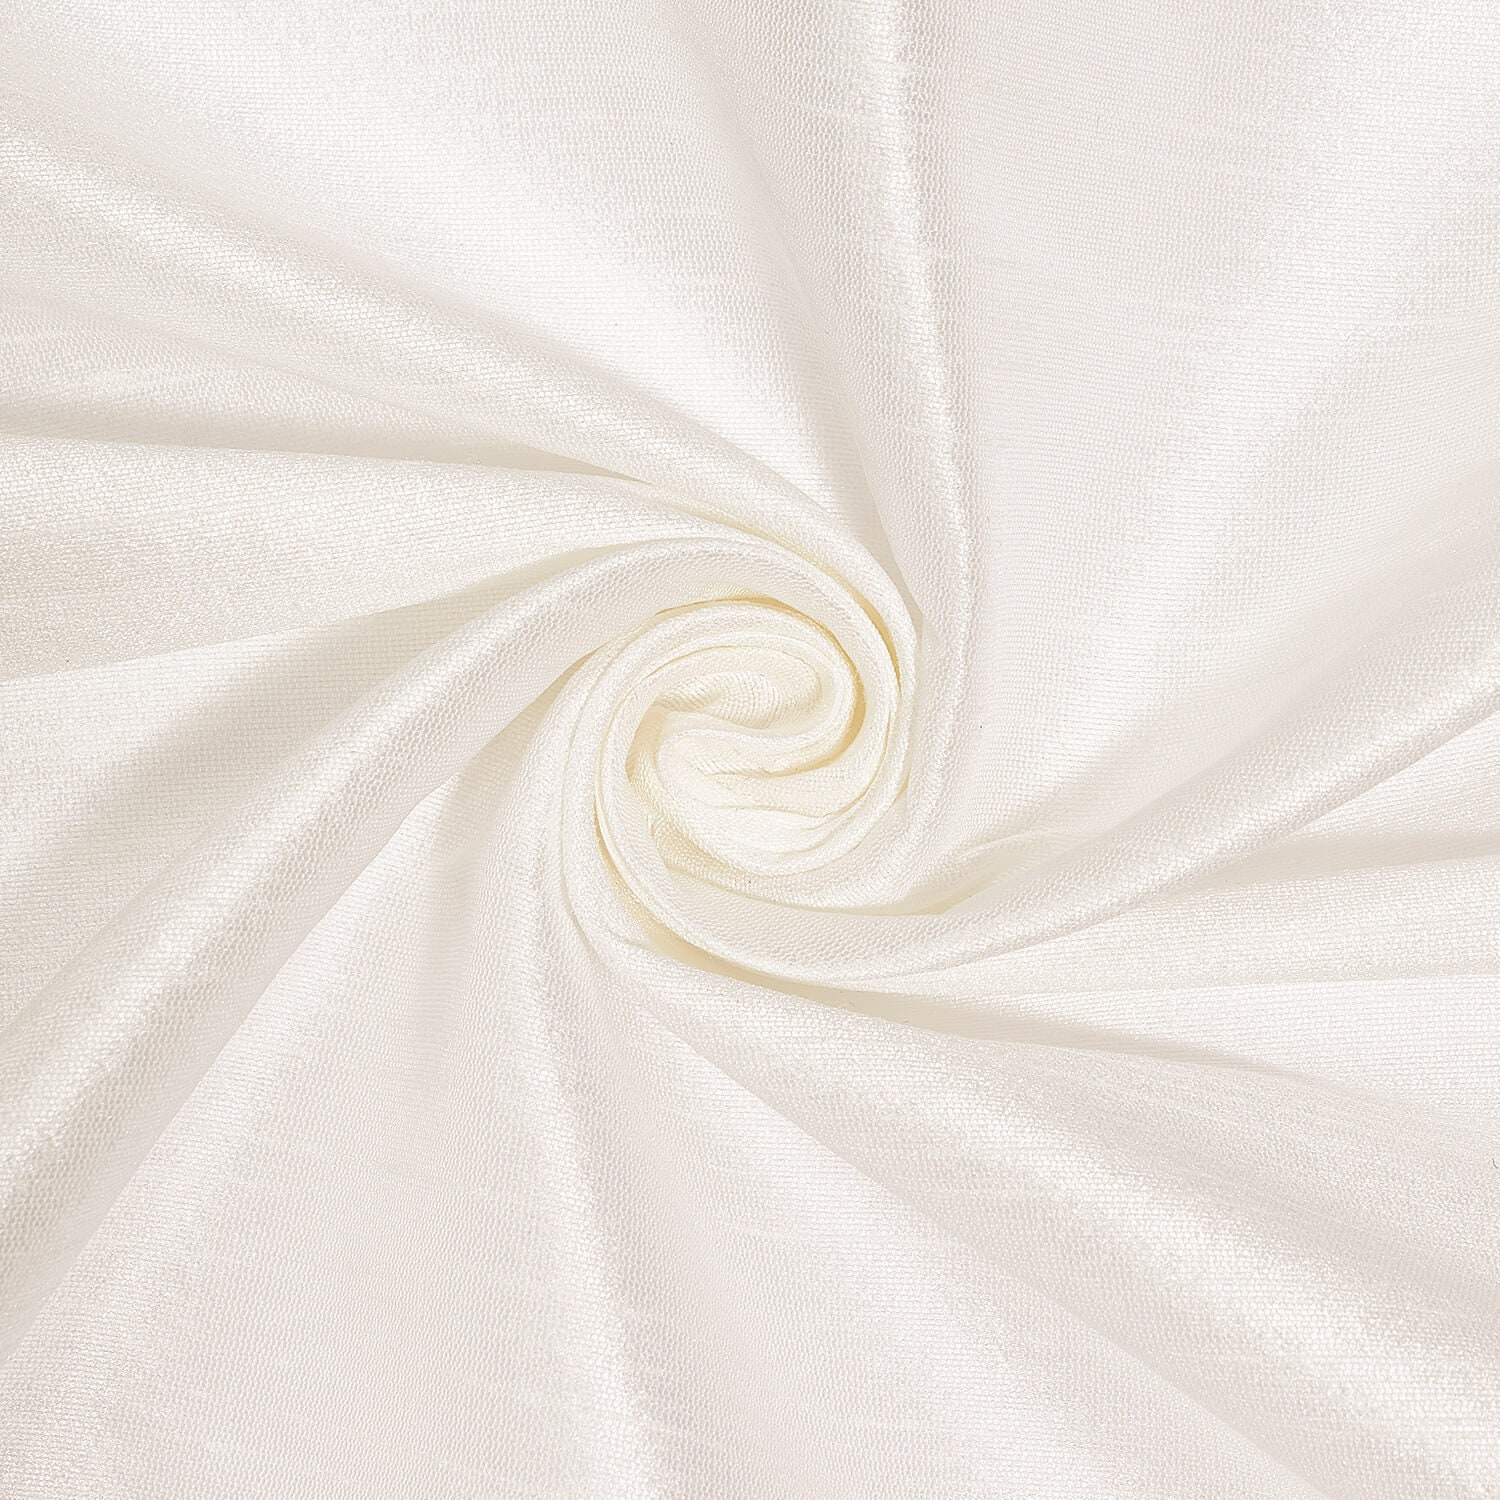 Silk Dupioni (54 inch) Fabric - Off White / Yard Many Colors Available